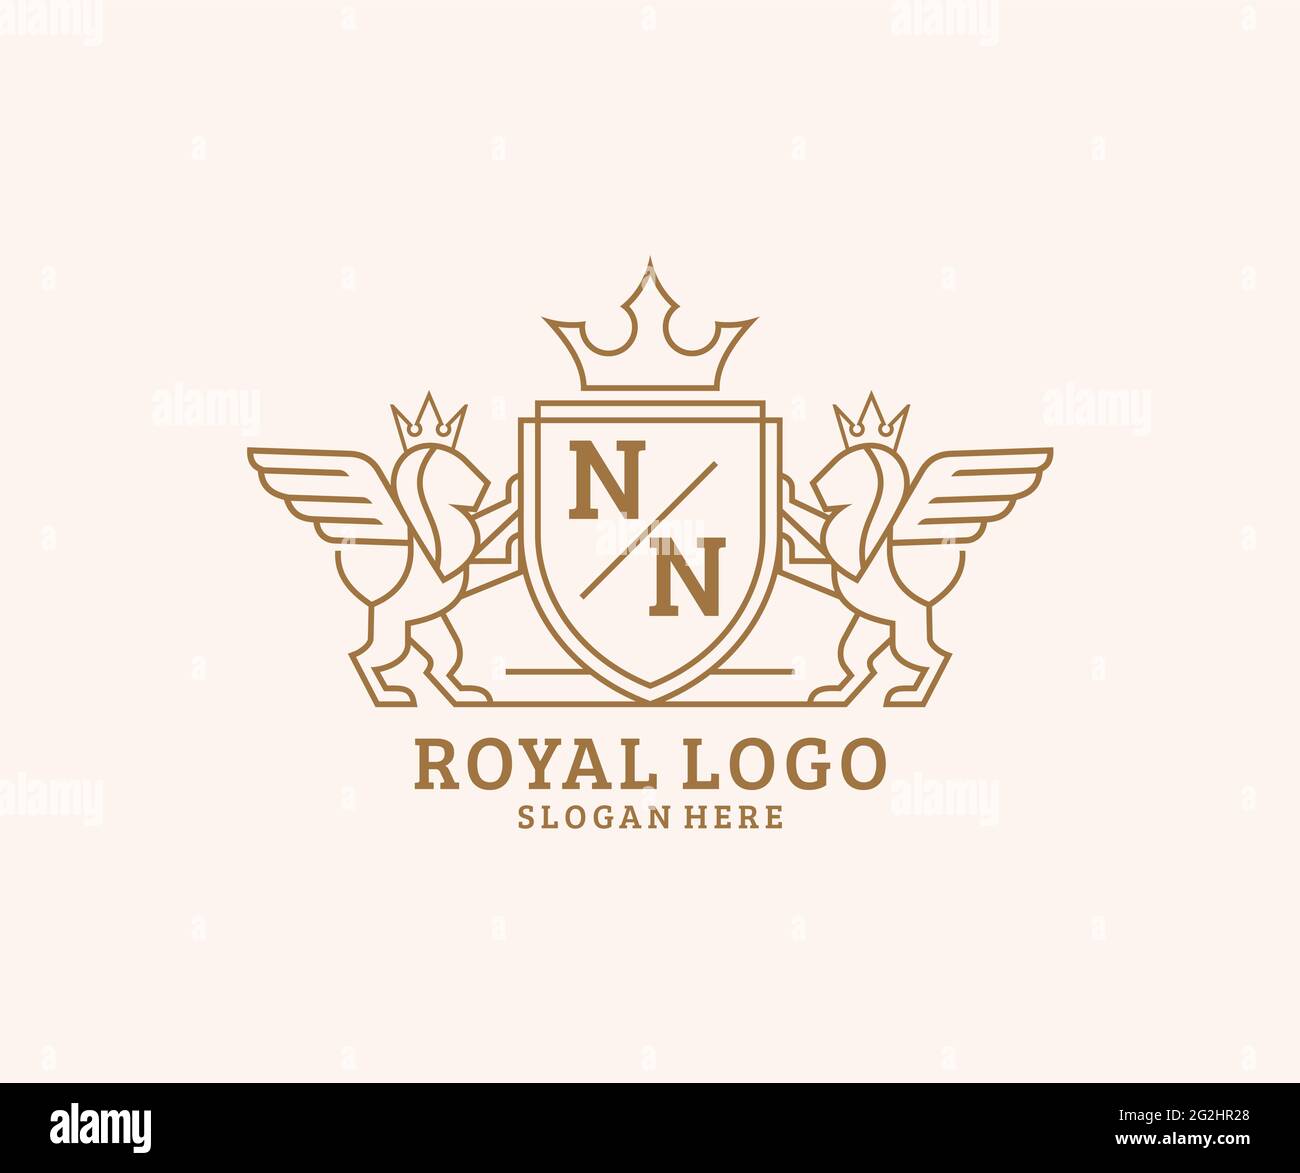 NN Letter Lion Royal Luxury Heraldic,Crest Logo template in vector art for Restaurant, Royalty, Boutique, Cafe, Hotel, Heraldic, Jewelry, Fashion and Stock Vector